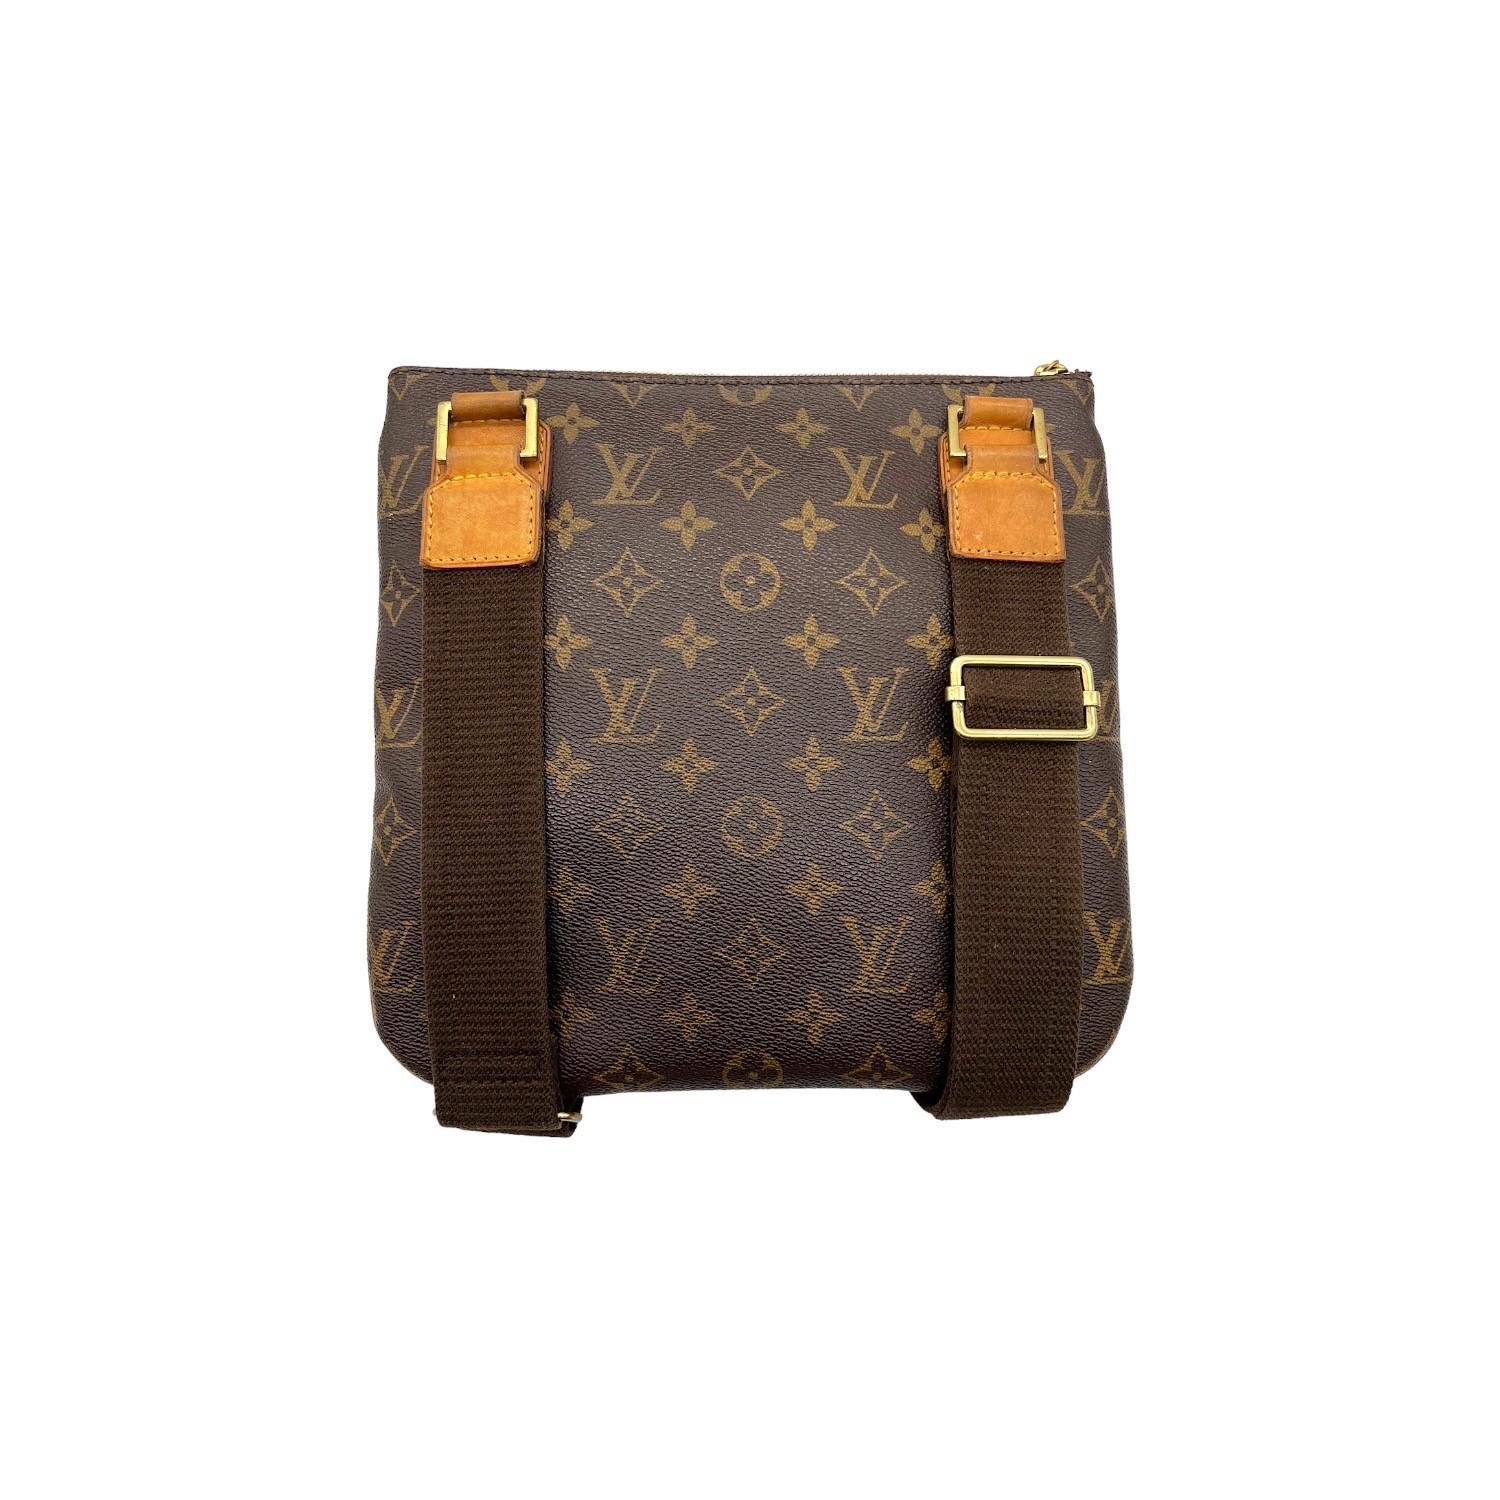 This Louis Vuitton Pochette Bosphore messenger crossbody bag was crafted in 2010 in France, and it is made with Louis Vuitton's classic Monogram coated canvas with leather trimmings and gold-tone hardware features. It features a frontal zipper